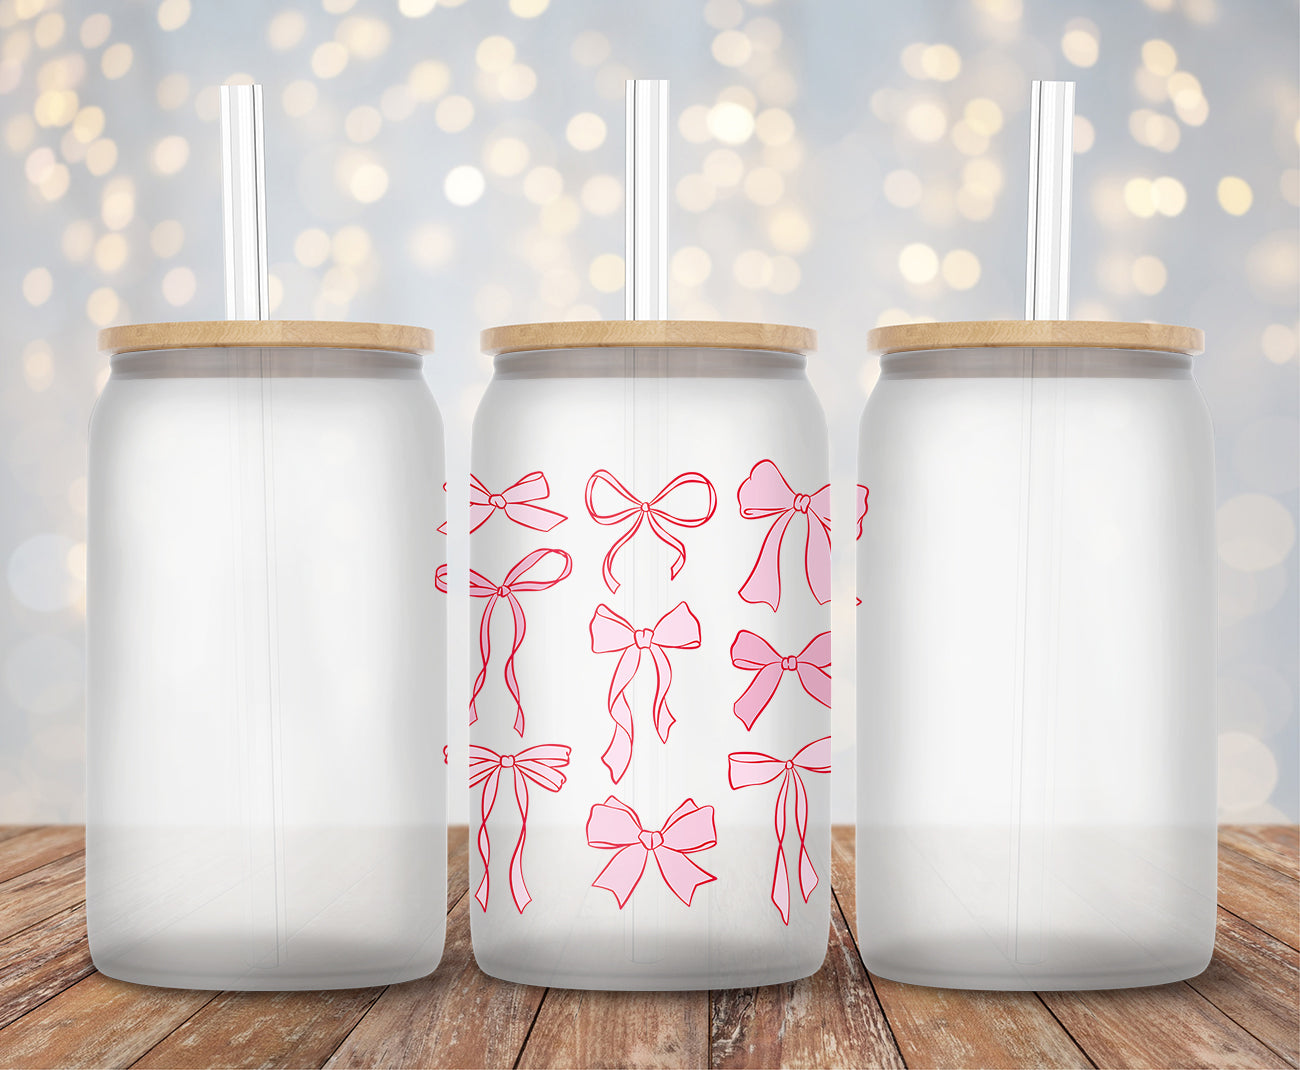 Pink Ribbons and Bows
- Decal